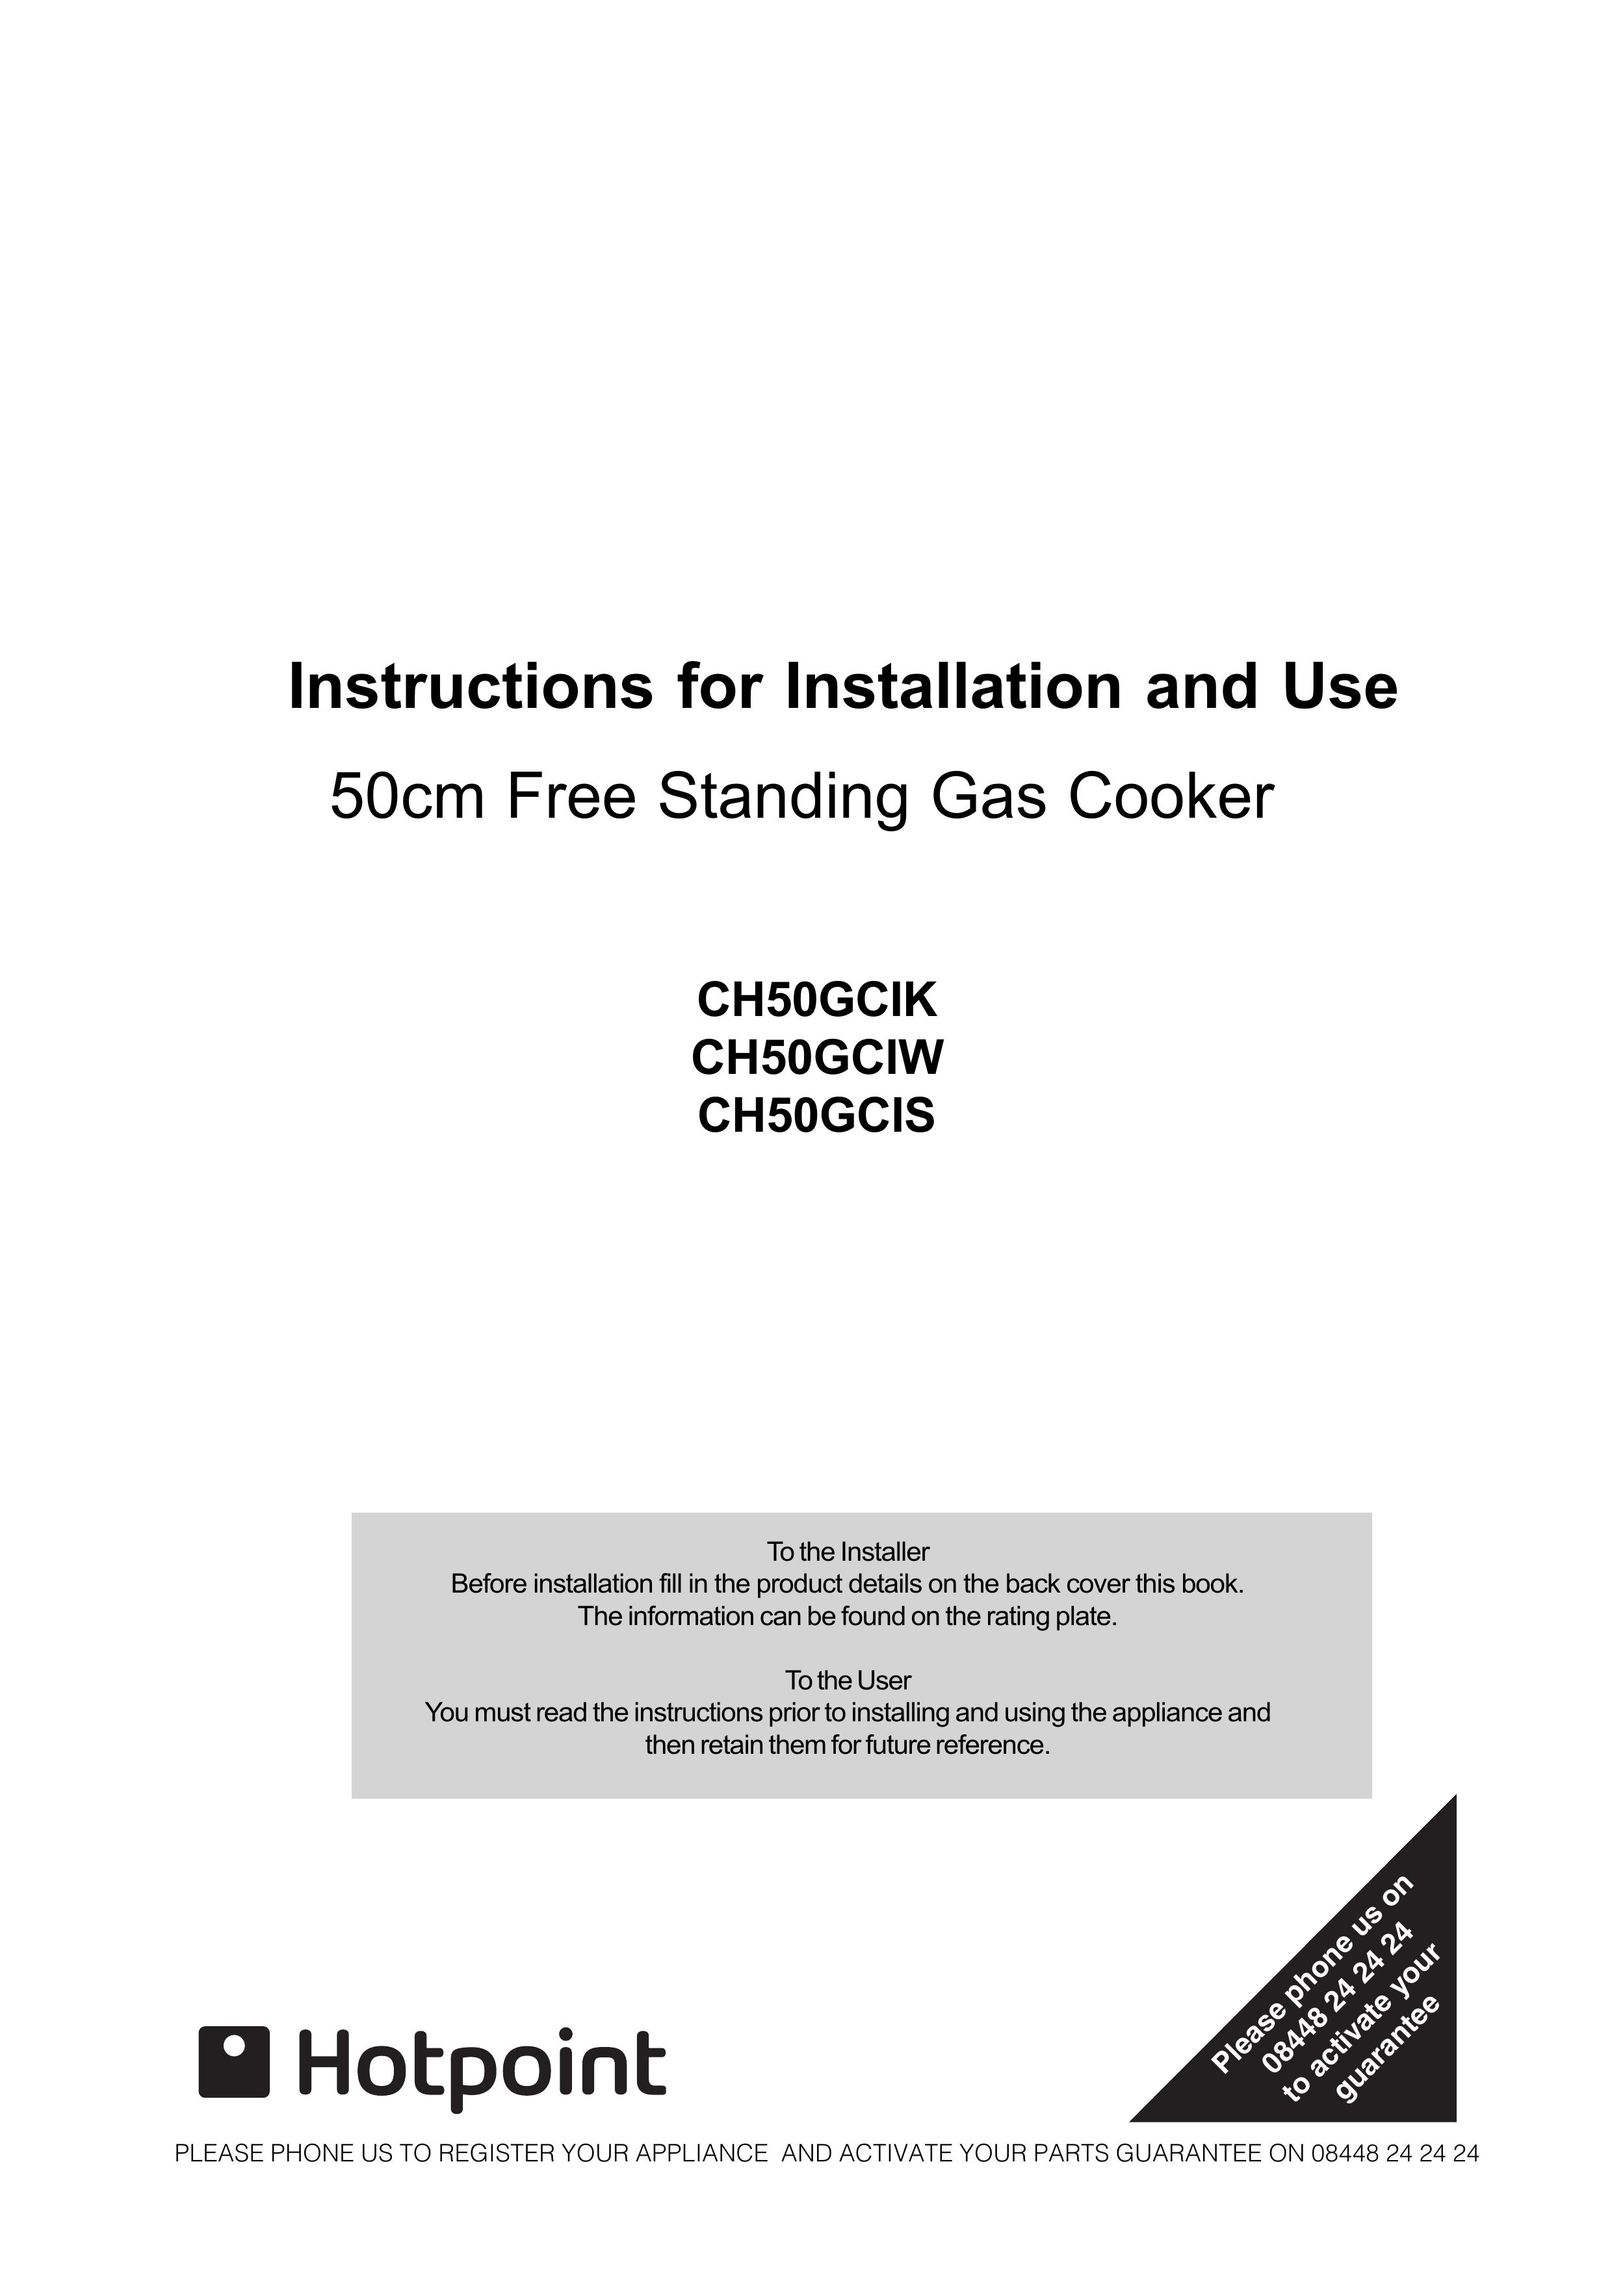 Hotpoint CH50GCIK Cooktop User Manual